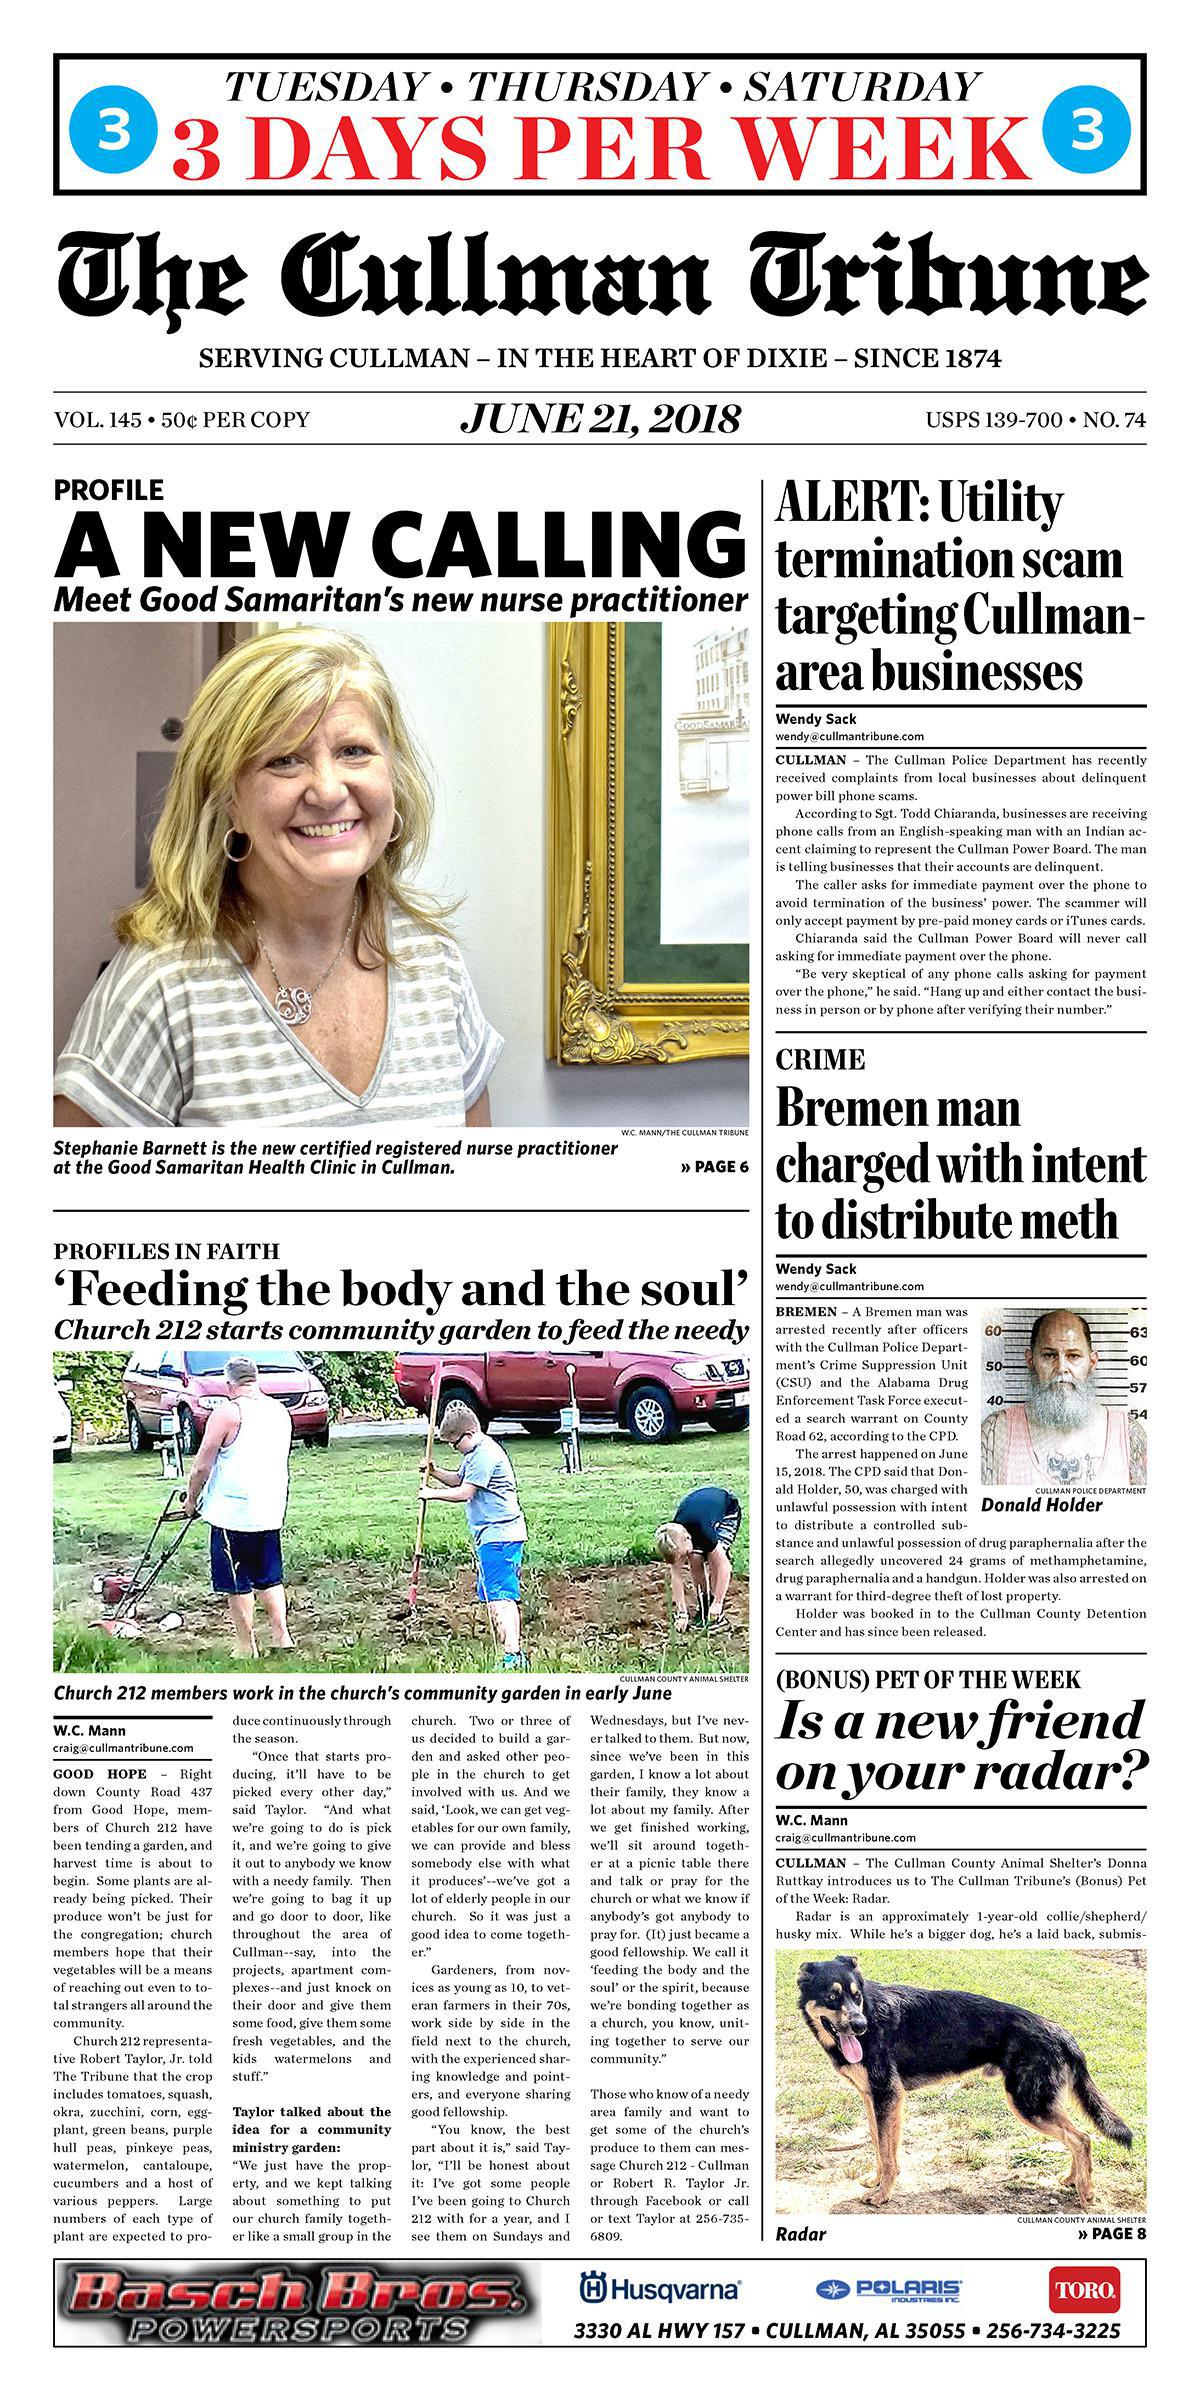 Good Morning Cullman! The 06-21-2018 edition of the Cullman Tribune is now ready to view